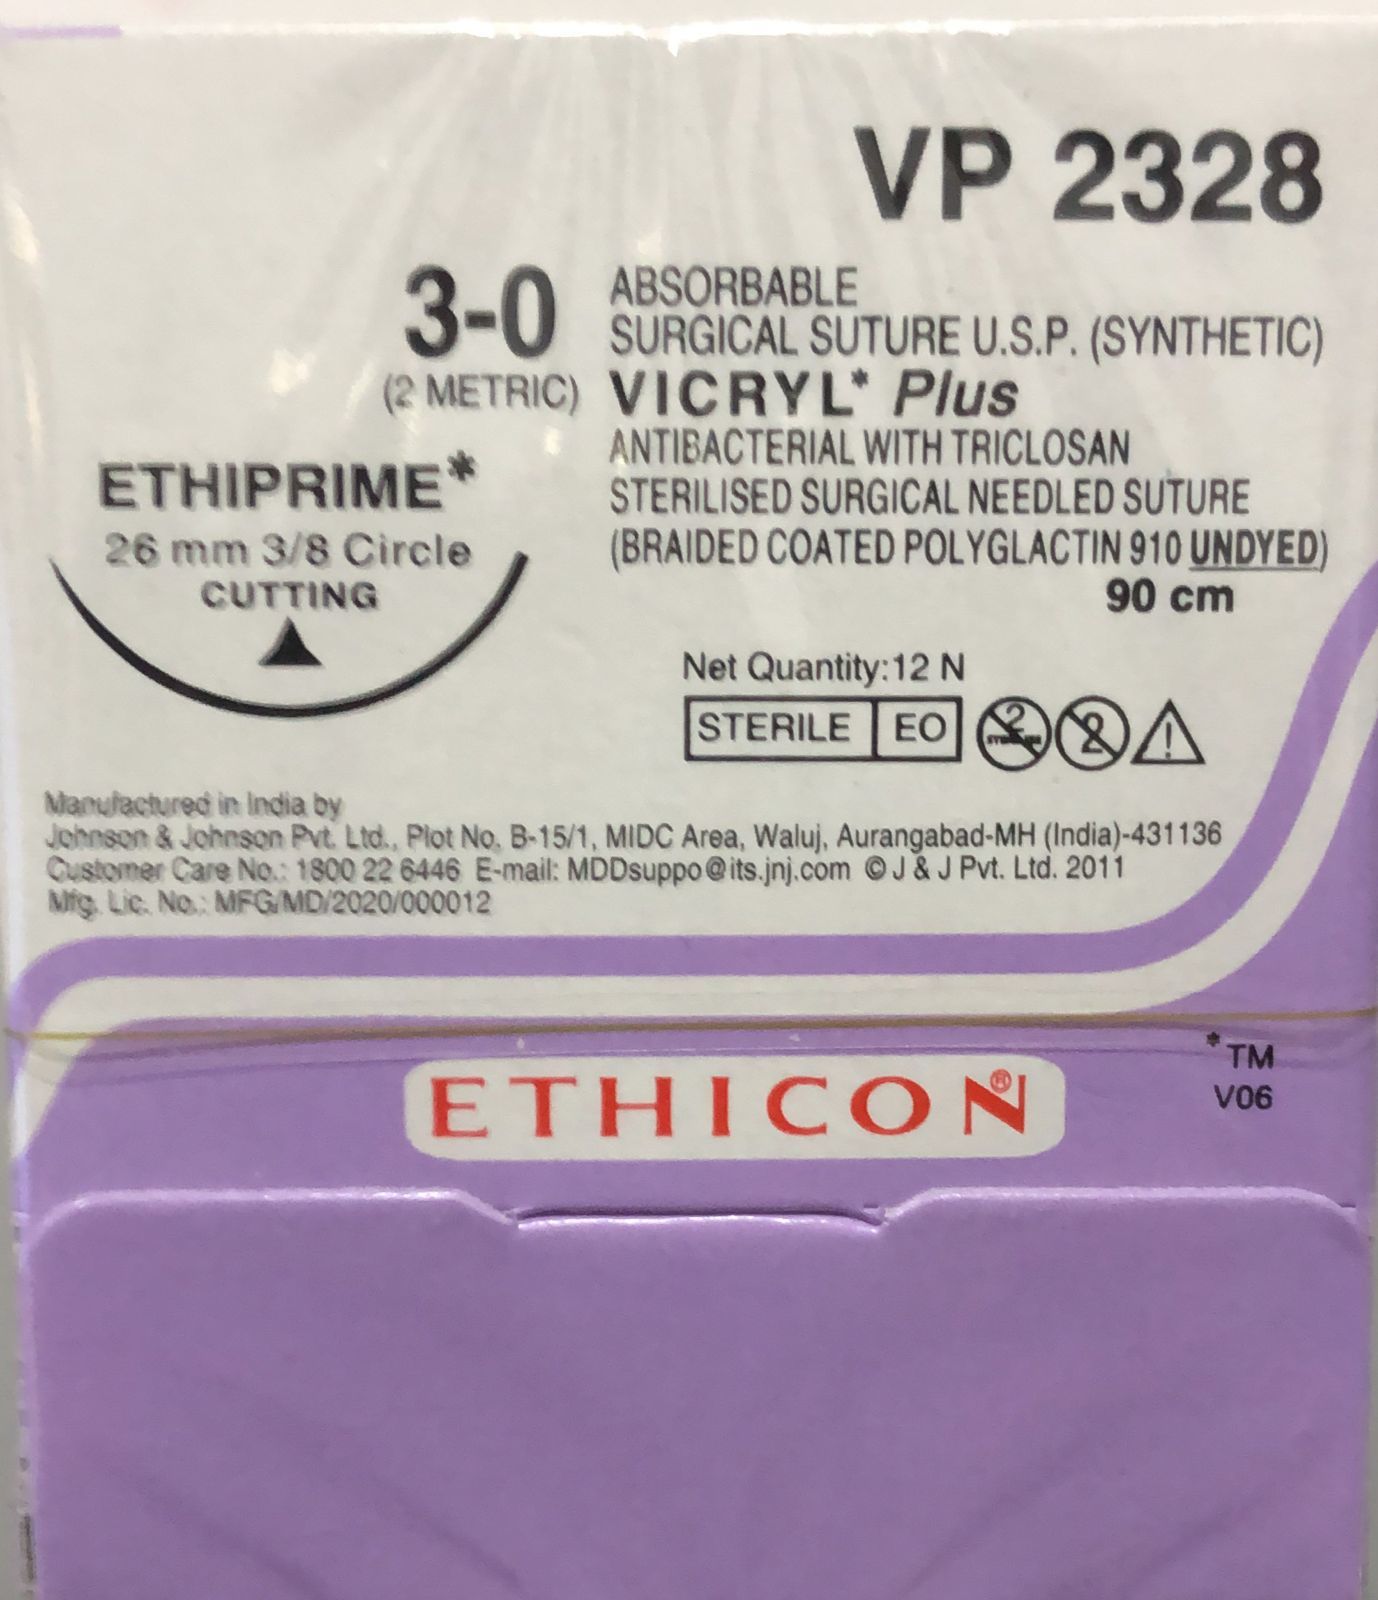 Ethicon Synthetic Absorbable Coated Vicryl Plus Antibacterial Sutures(VP2328)